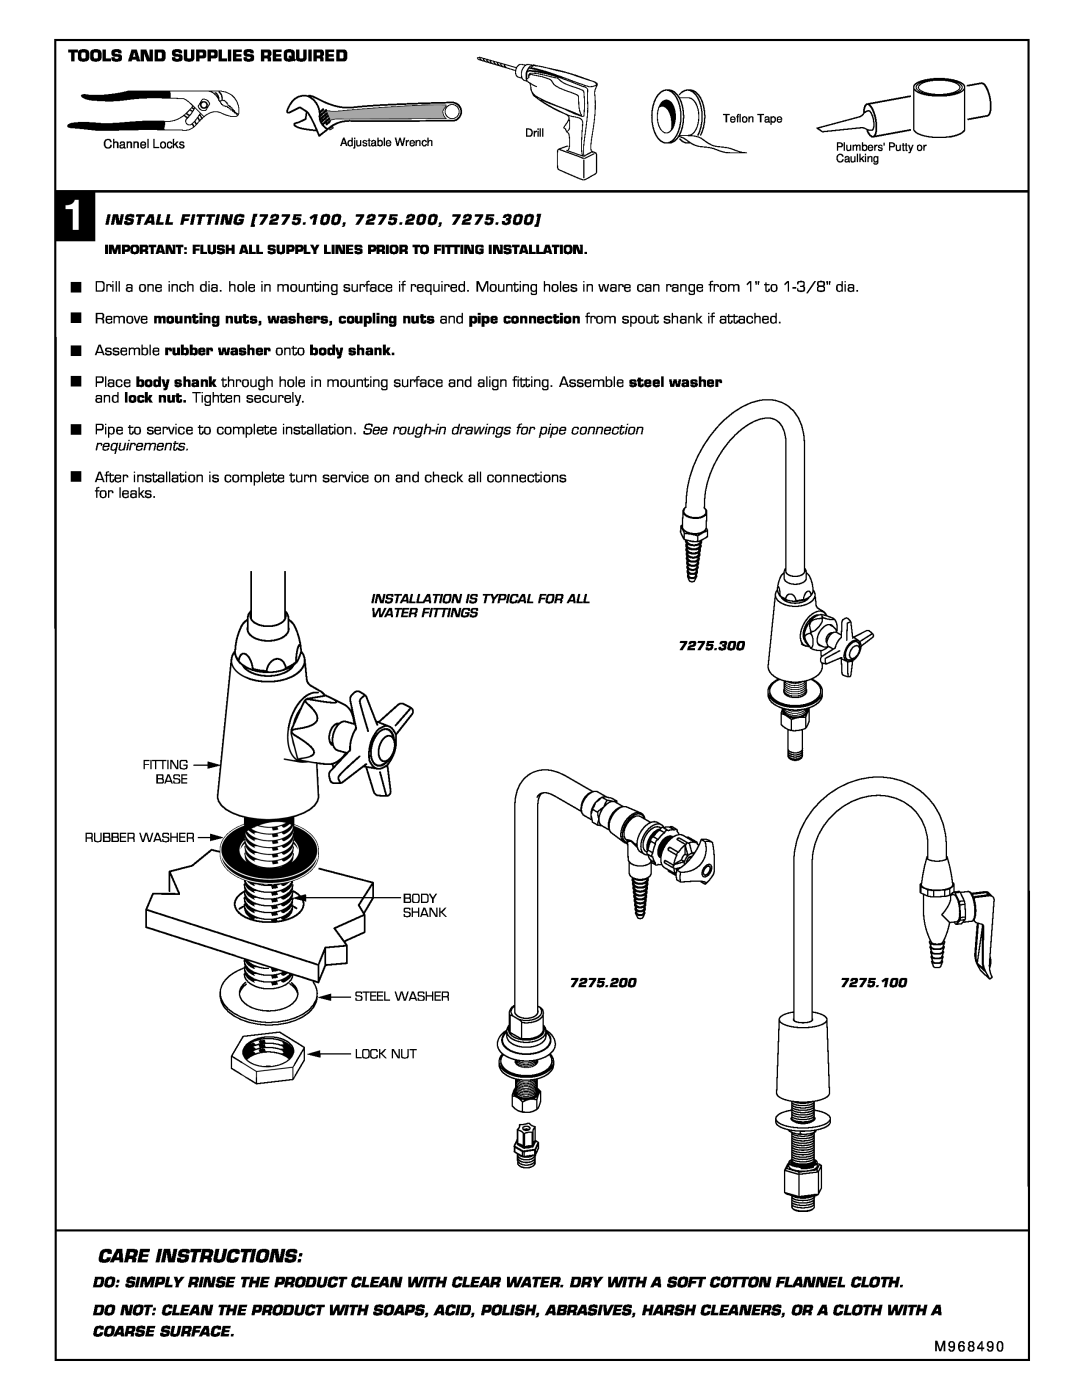 American Standard 7275.200 Care Instructions, Tools And Supplies Required, Assemble rubber washer onto body shank 